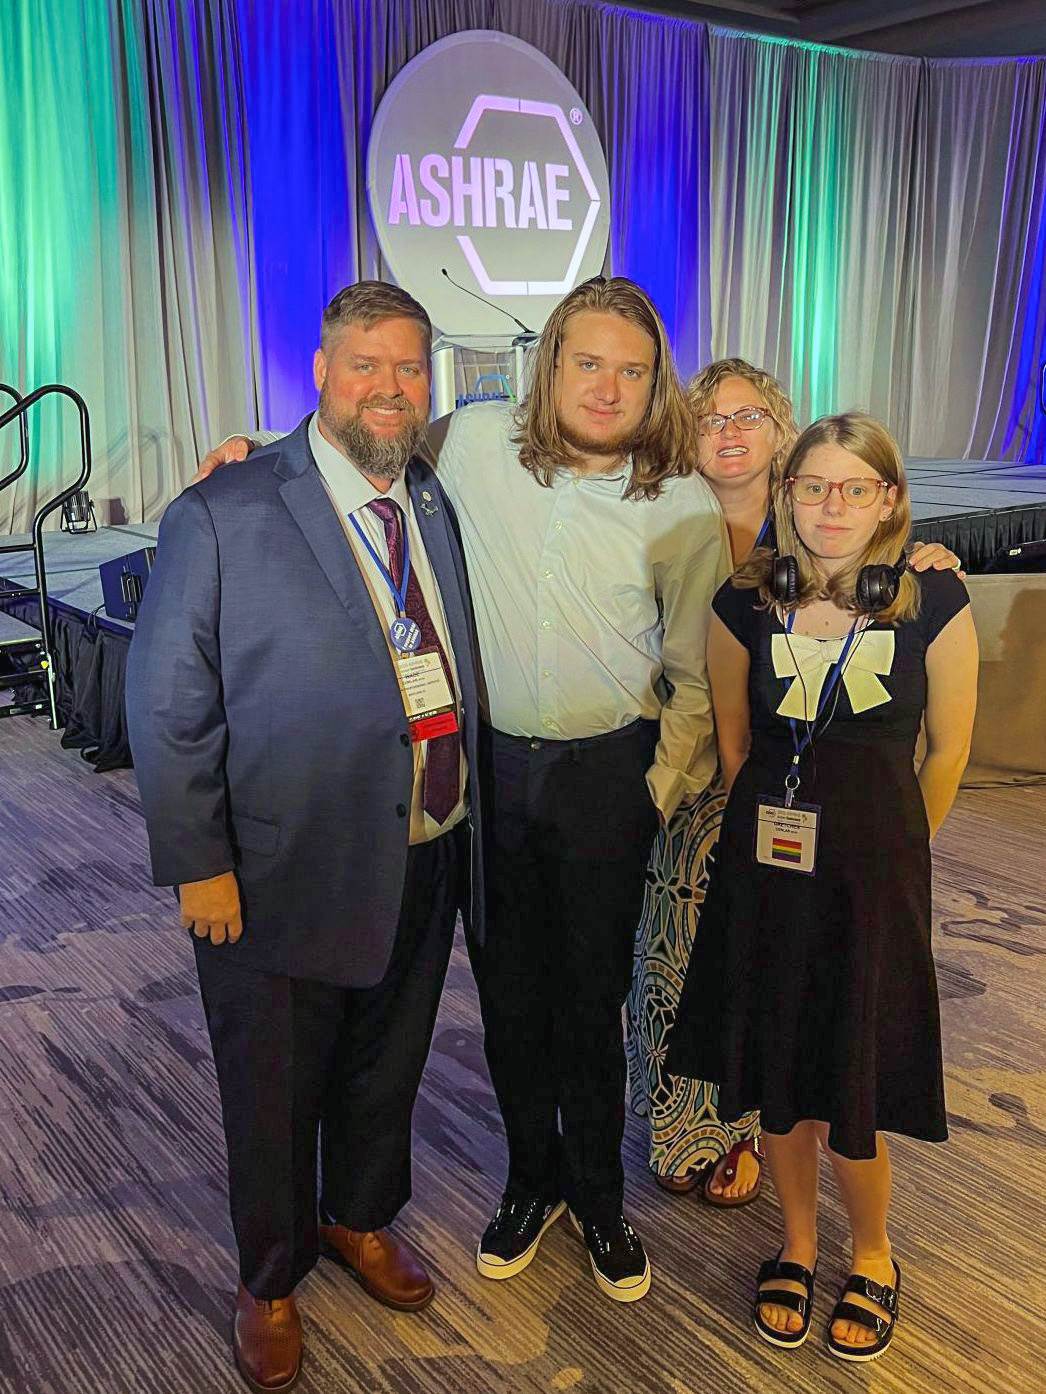 A family of four stands in front of a stage with a lectern and an ASHRAE logo behind it a hotel ballroom